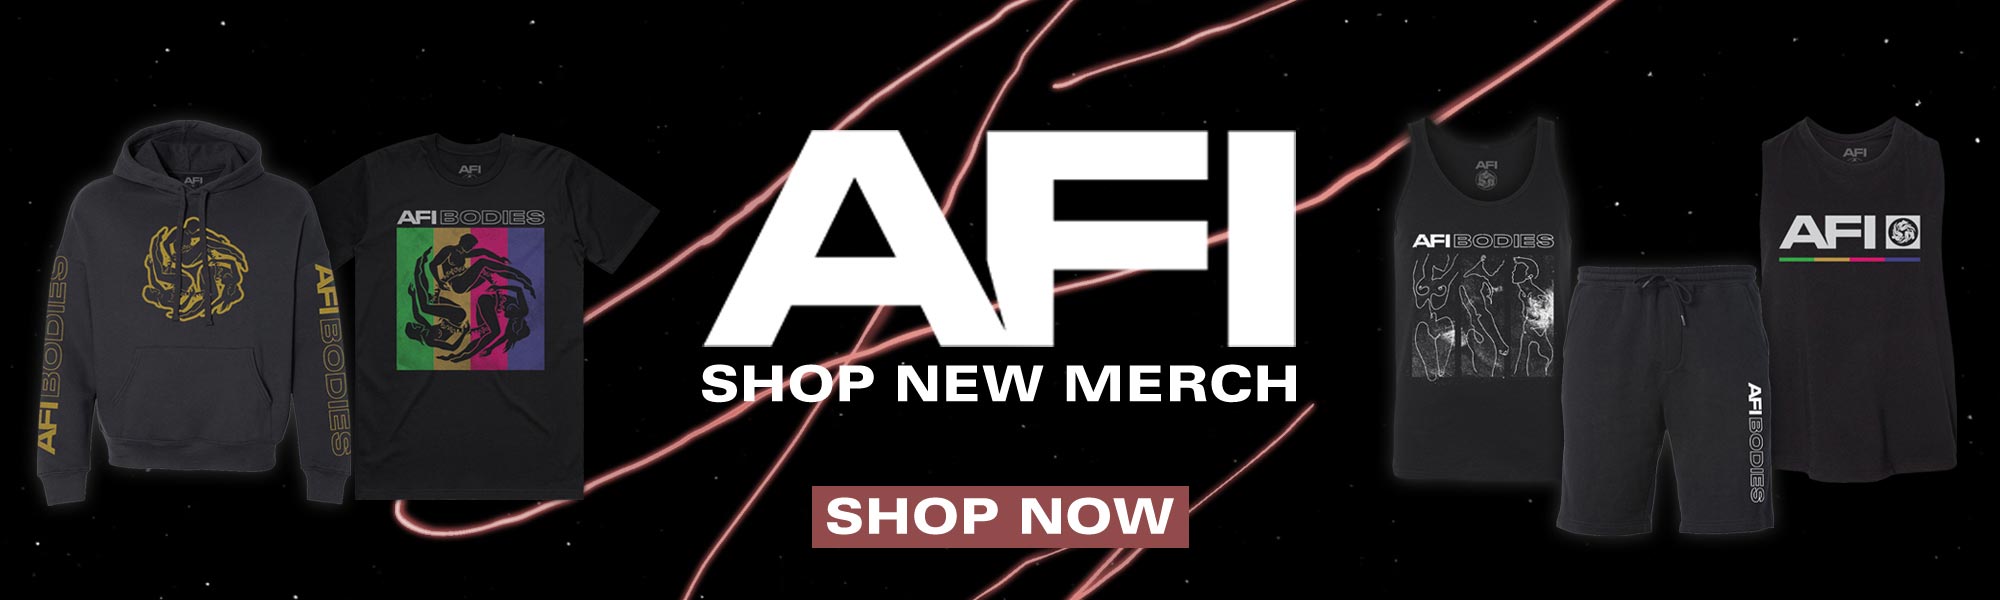 AFI Merch - Bodies, Out Now